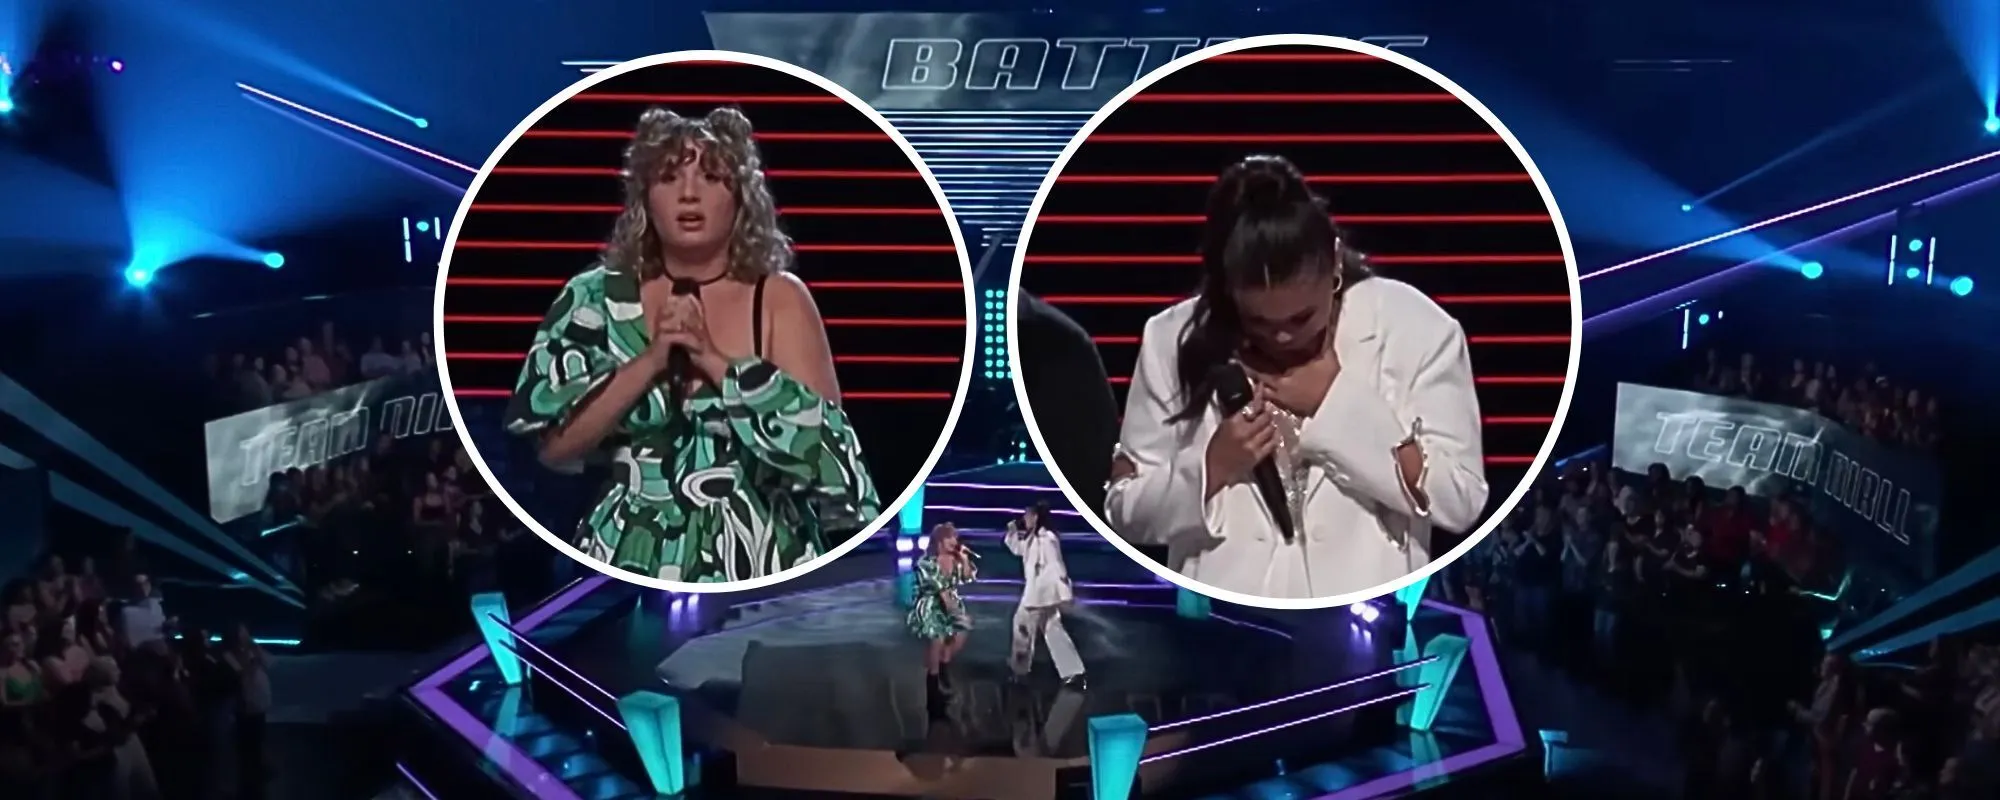 ‘The Voice’ Contestant Olivia Minogue Lands an Emotional Battle Round Win with “Ghost”